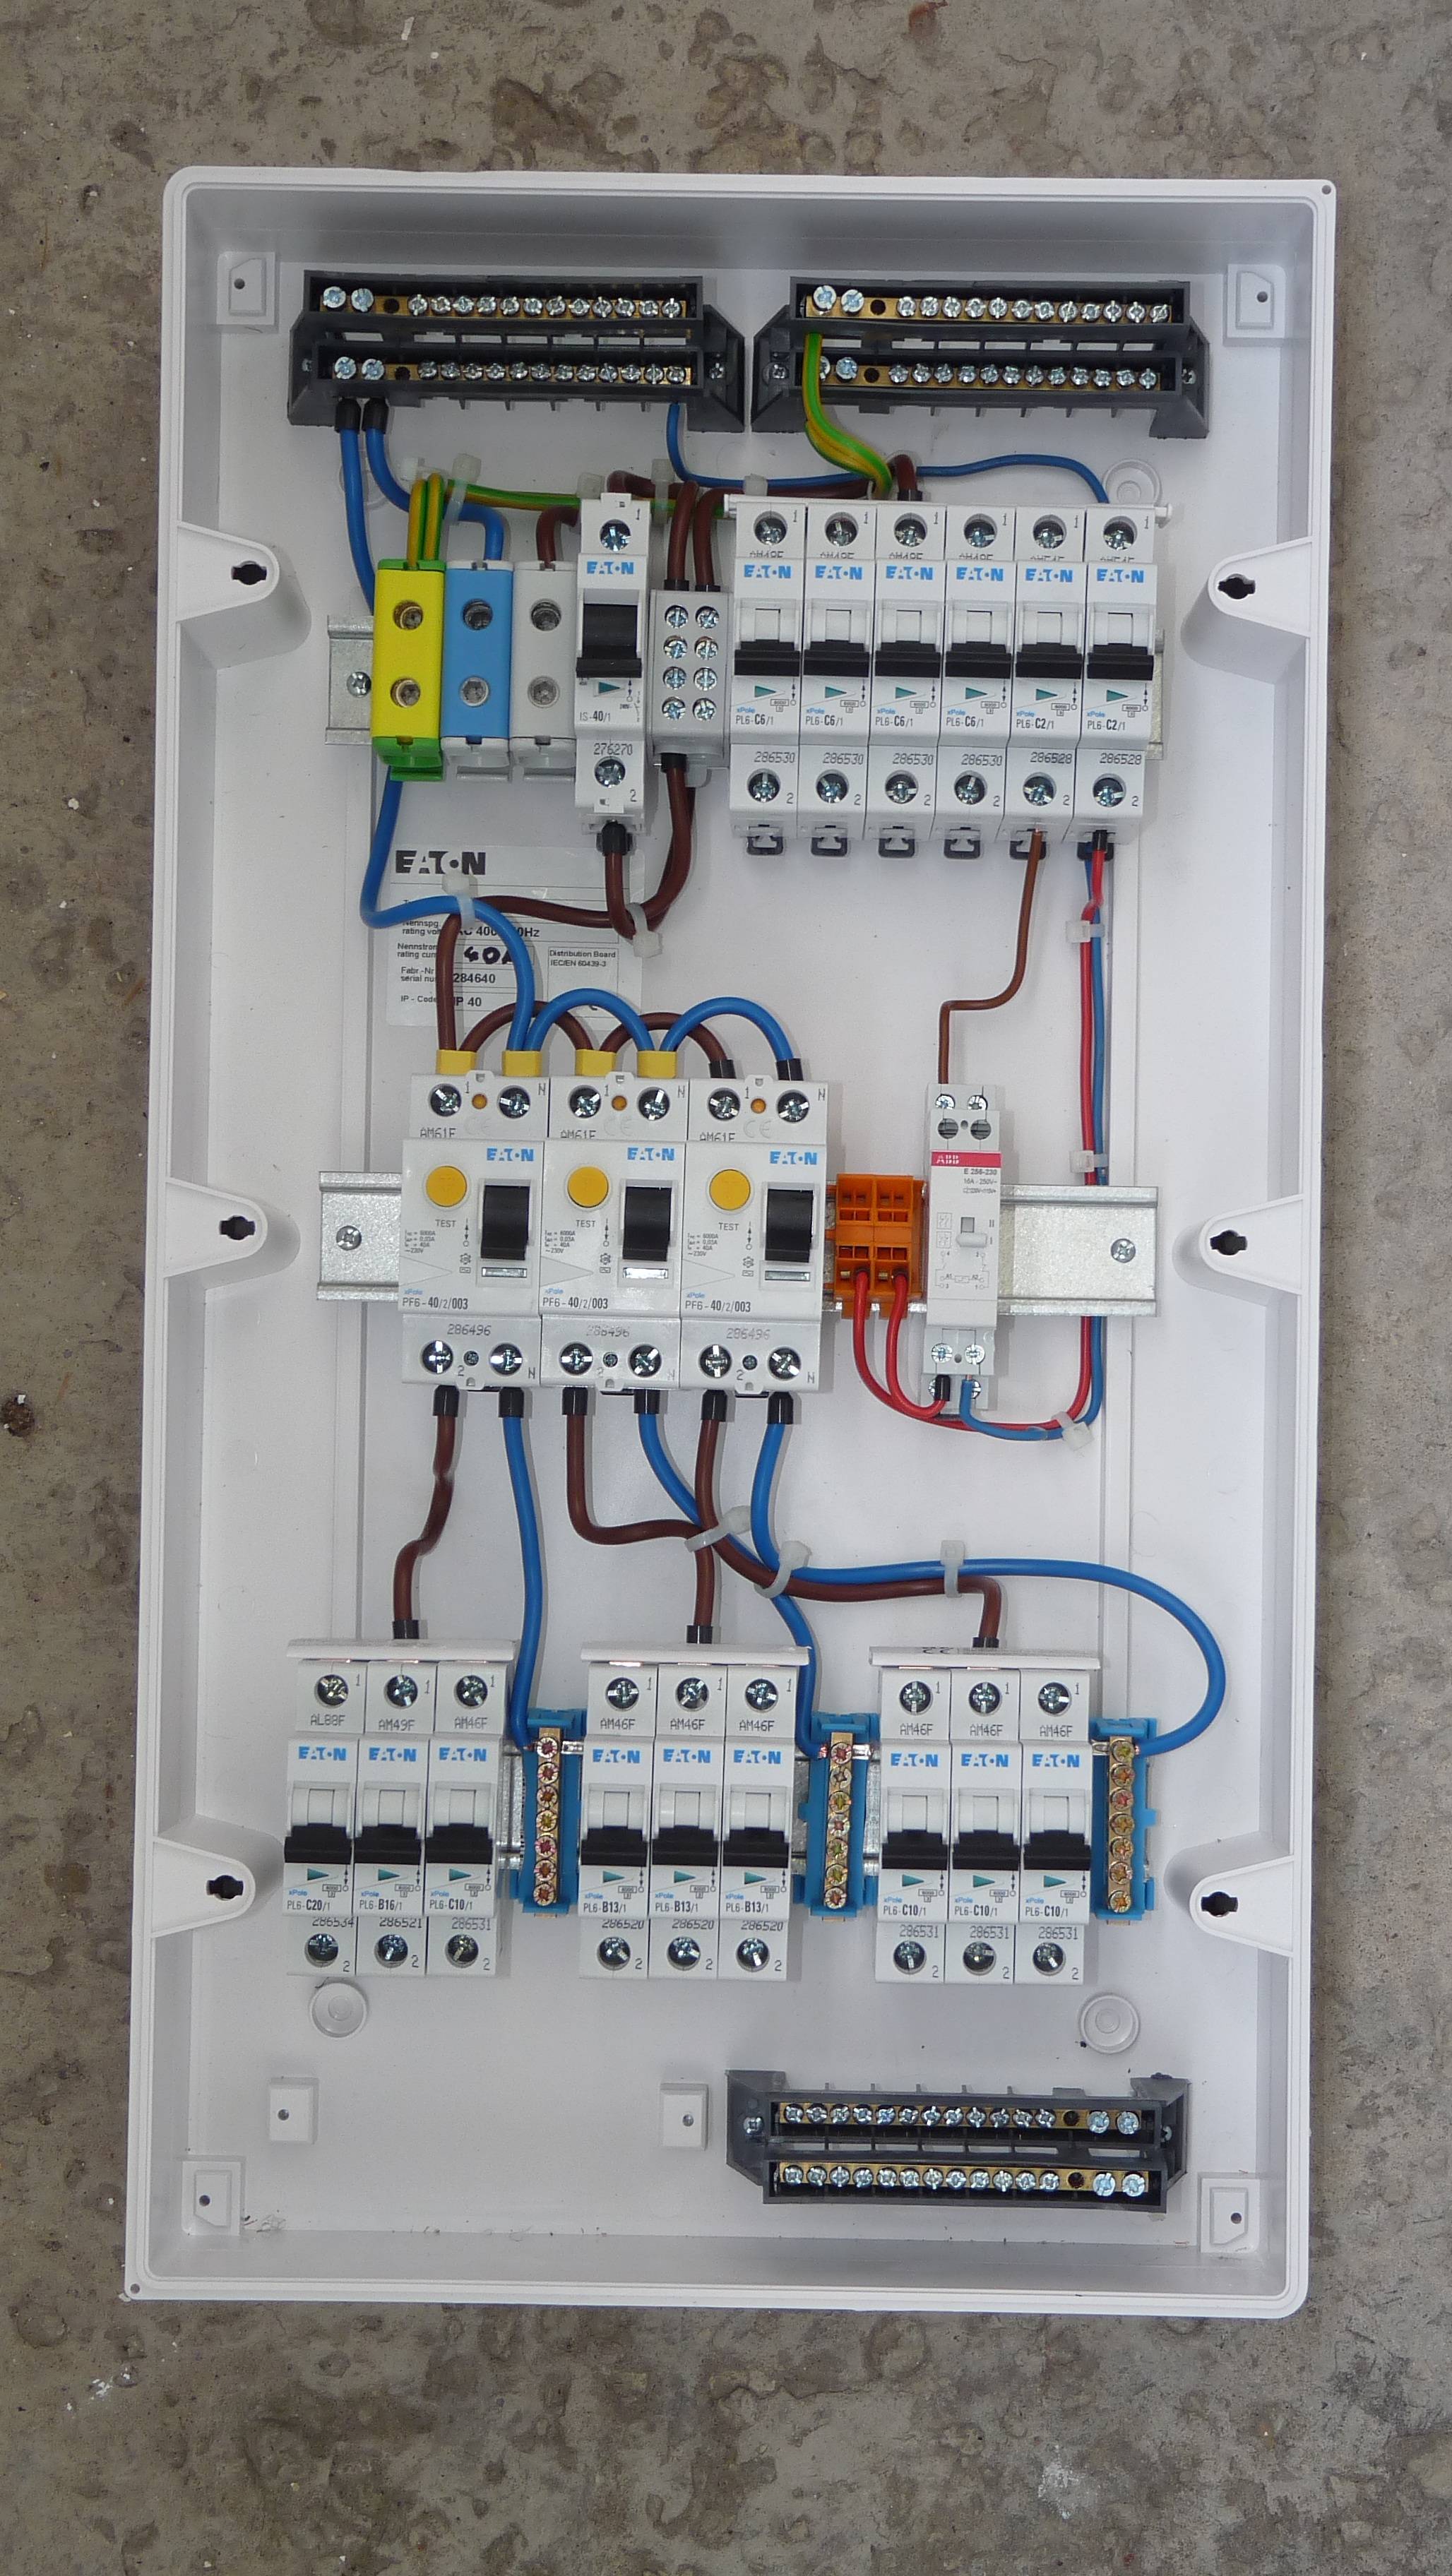 File:paekaare 24 - Wiring Diagram Of Apartment Fuse Box - Home Electrical Wiring Diagram